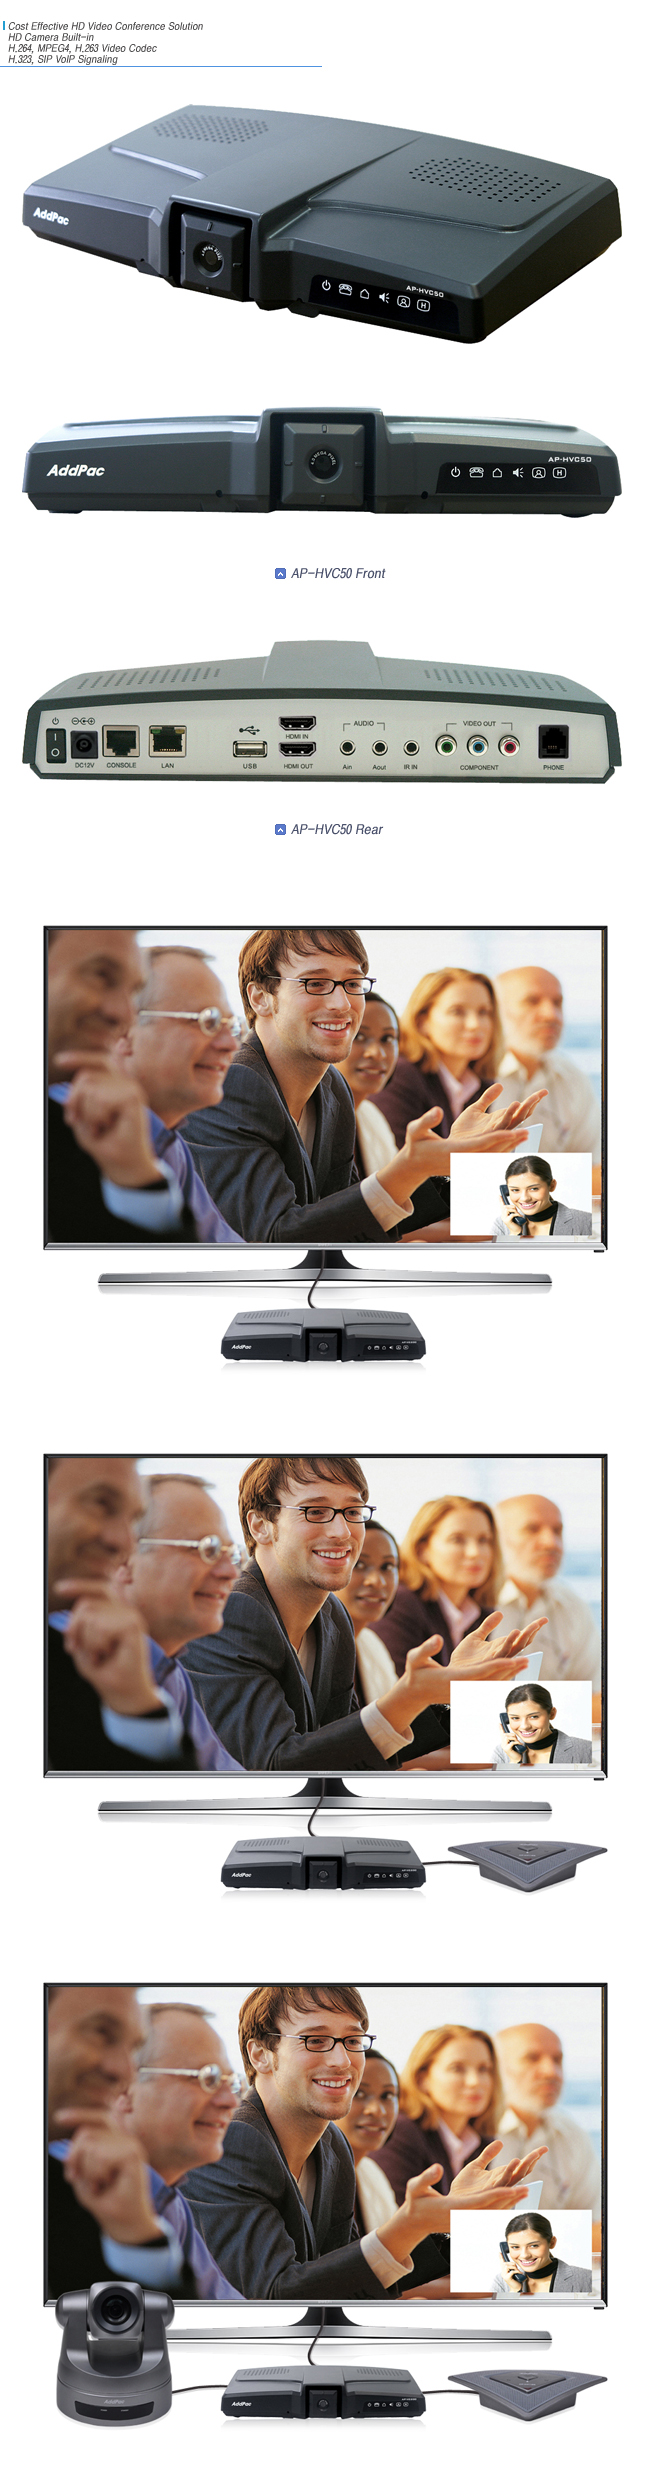 AP-HVC50 HD Video Conference  | AddPac